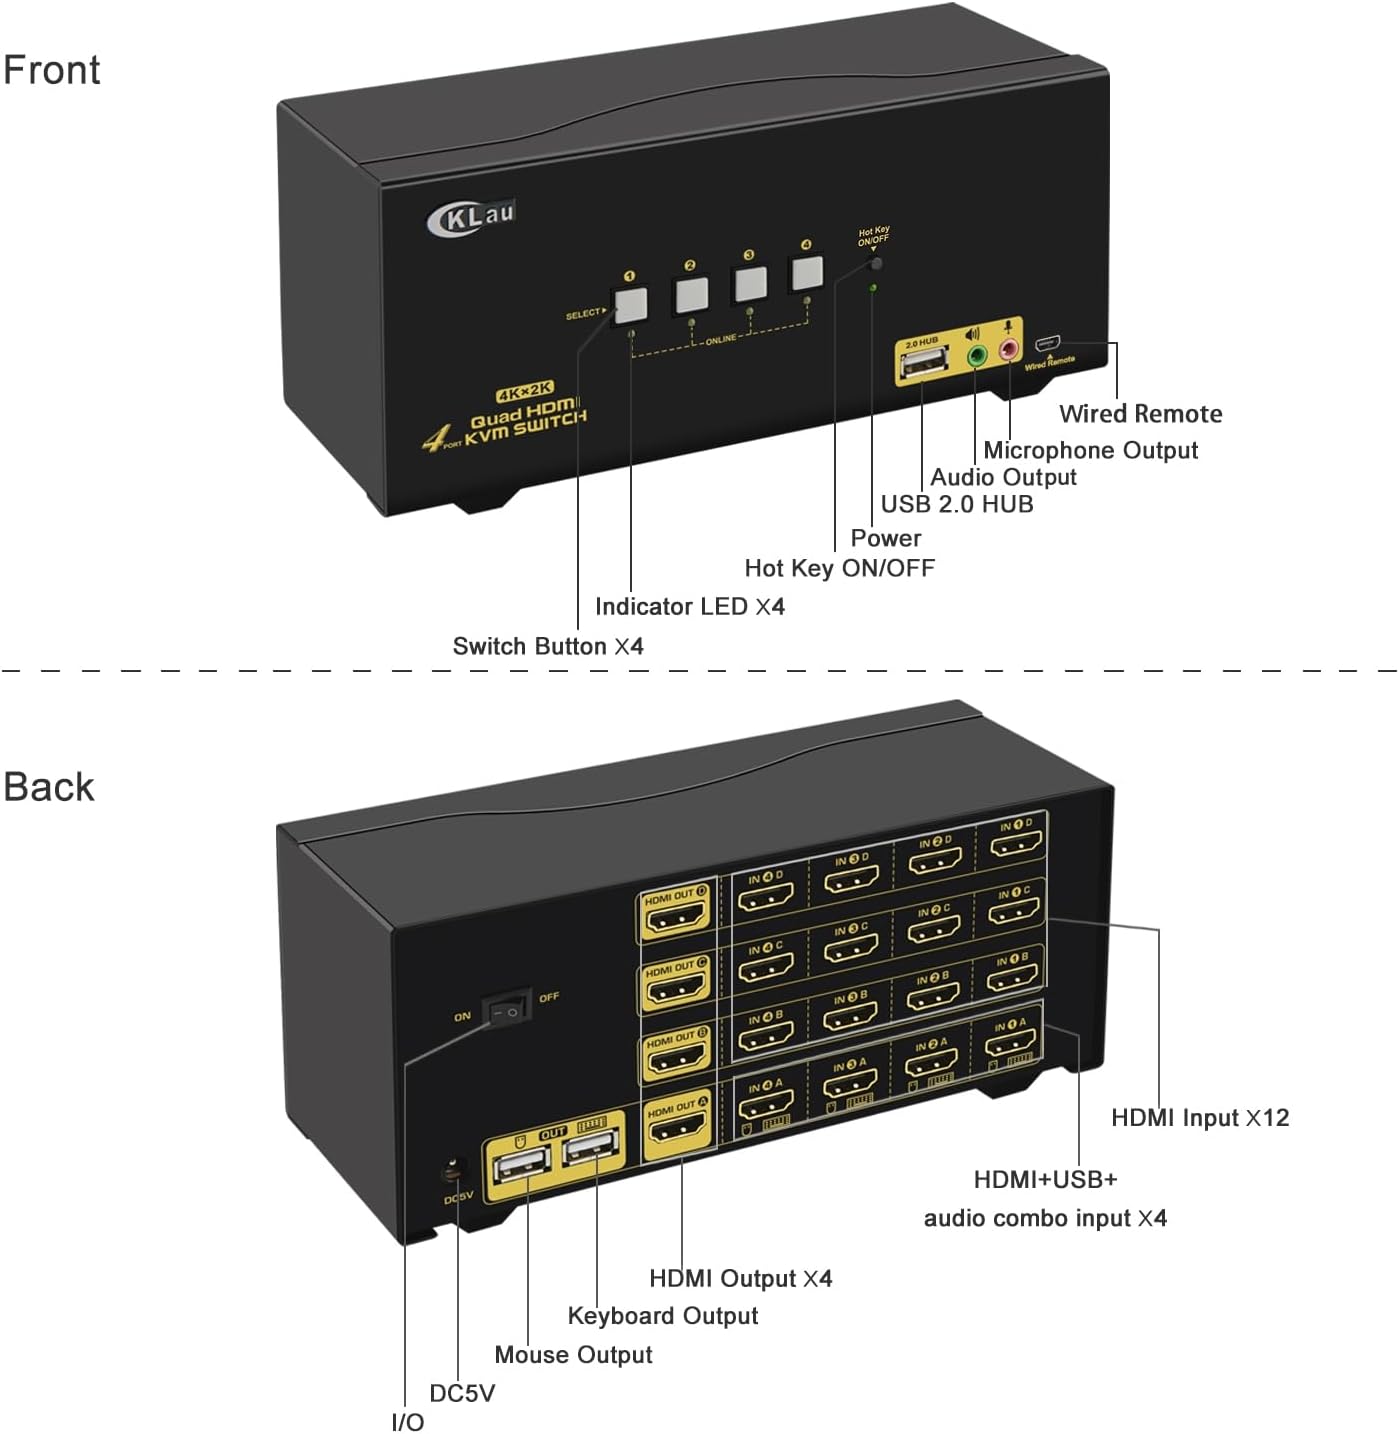 Step-by-step installation process of the CKLau KVM Switch